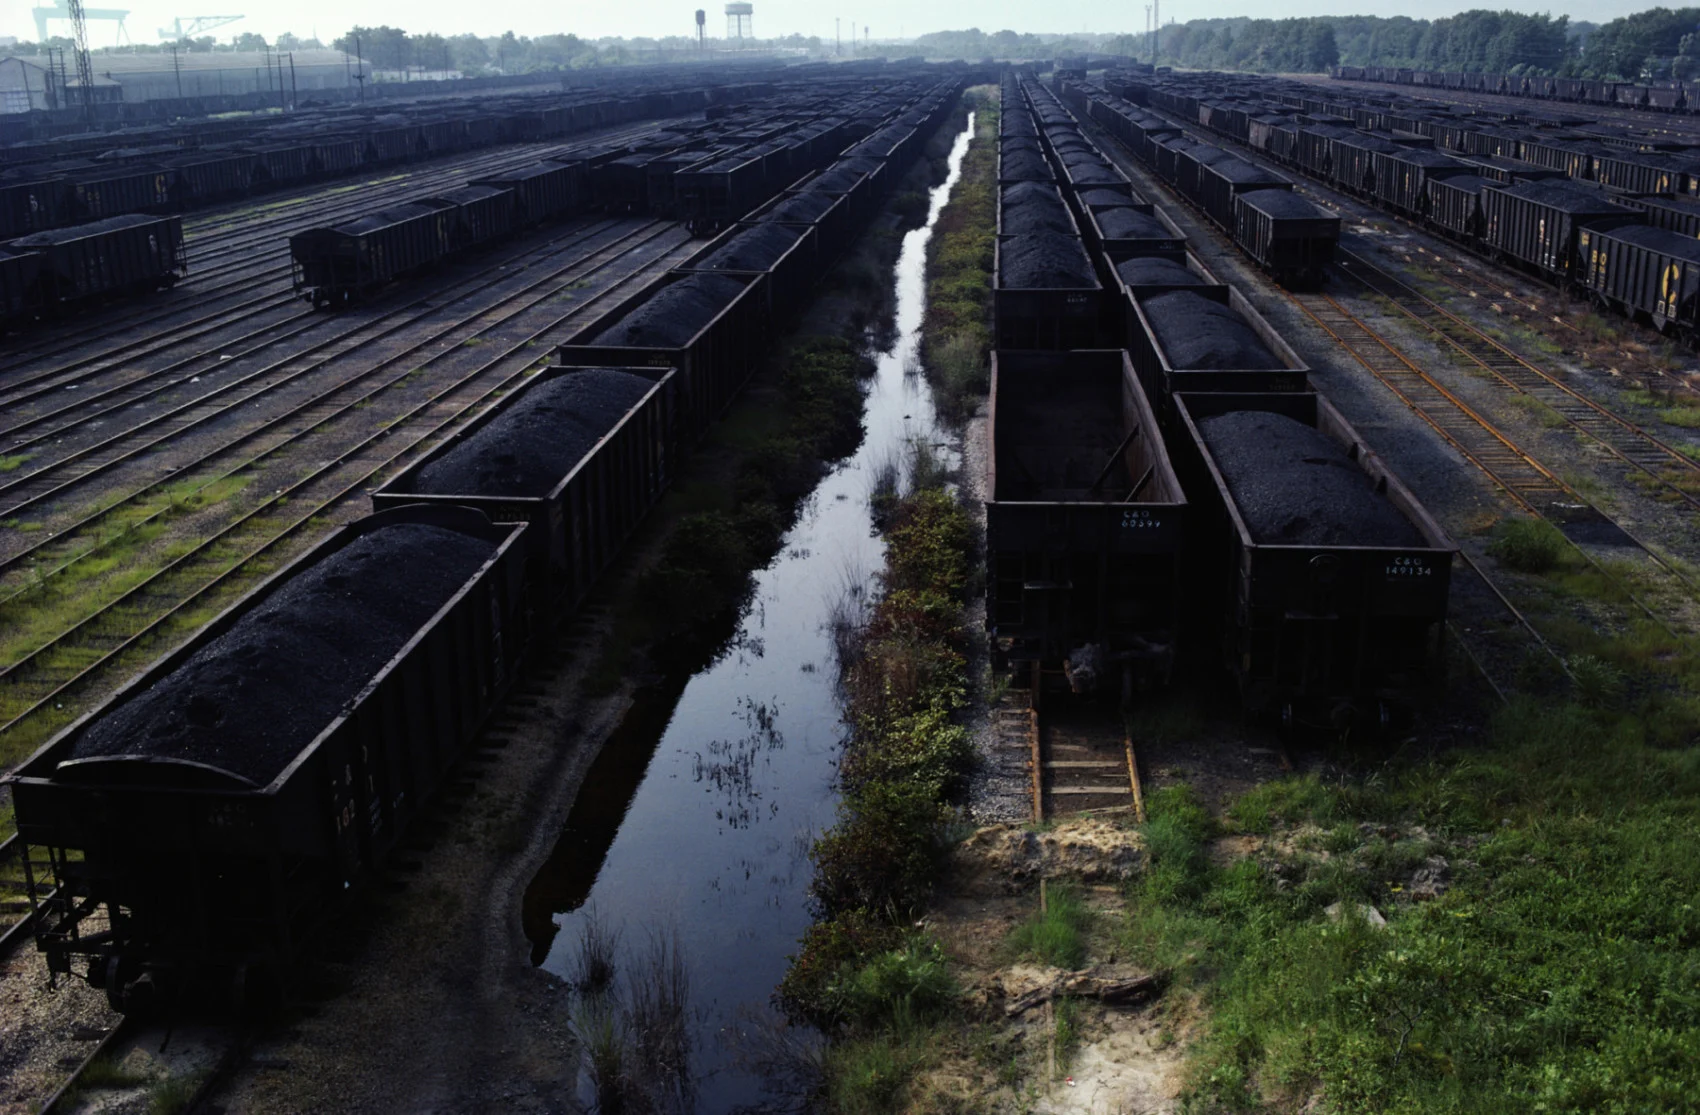 Train wagons loaded with coal in Norfolk, Virginia. (Kim Steele/ The Image Bank/ Getty Images)